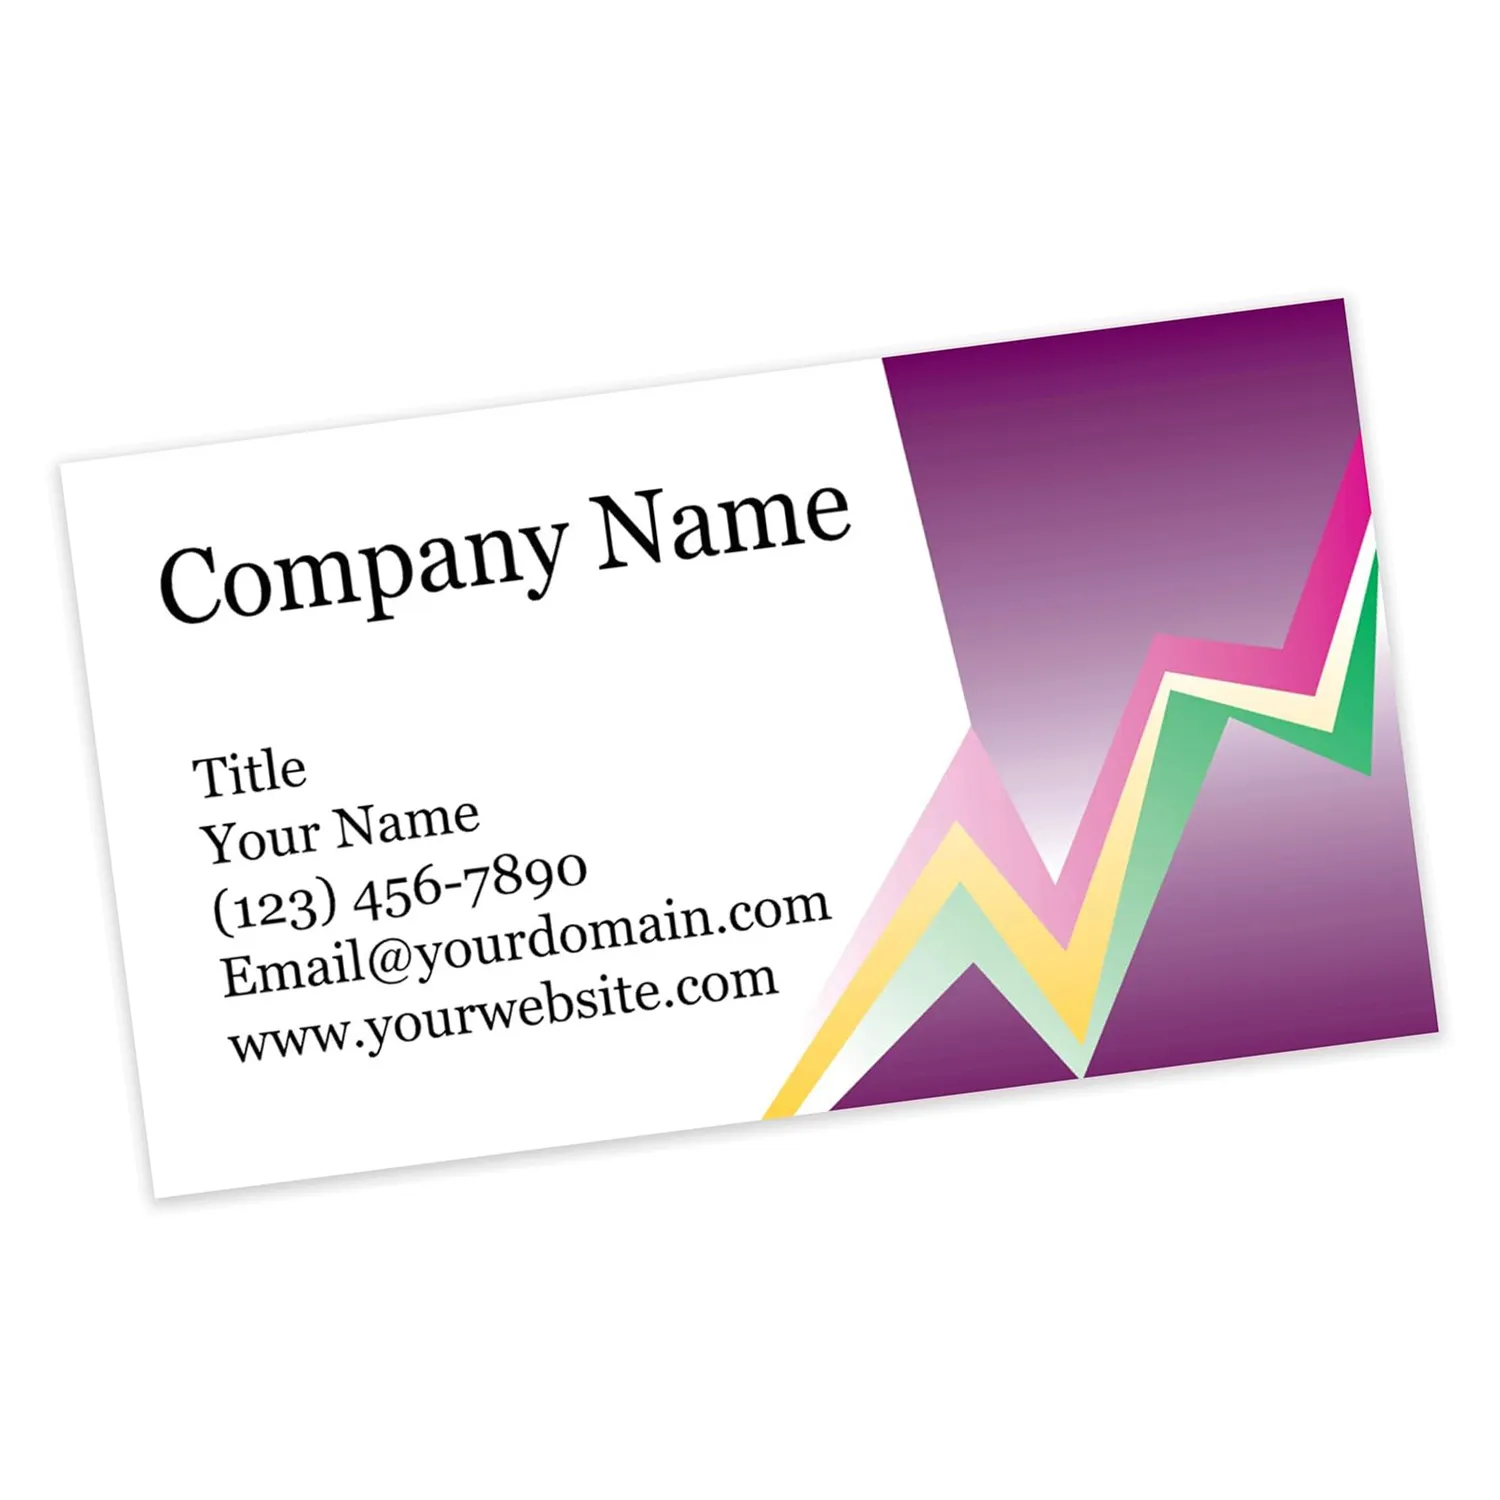 Explore The Beauty Of Our Recycled Business Cards Electric Retro 3.5" x 2" - 100 Cards - 14Pt, Recycled, 28PT Business Cards